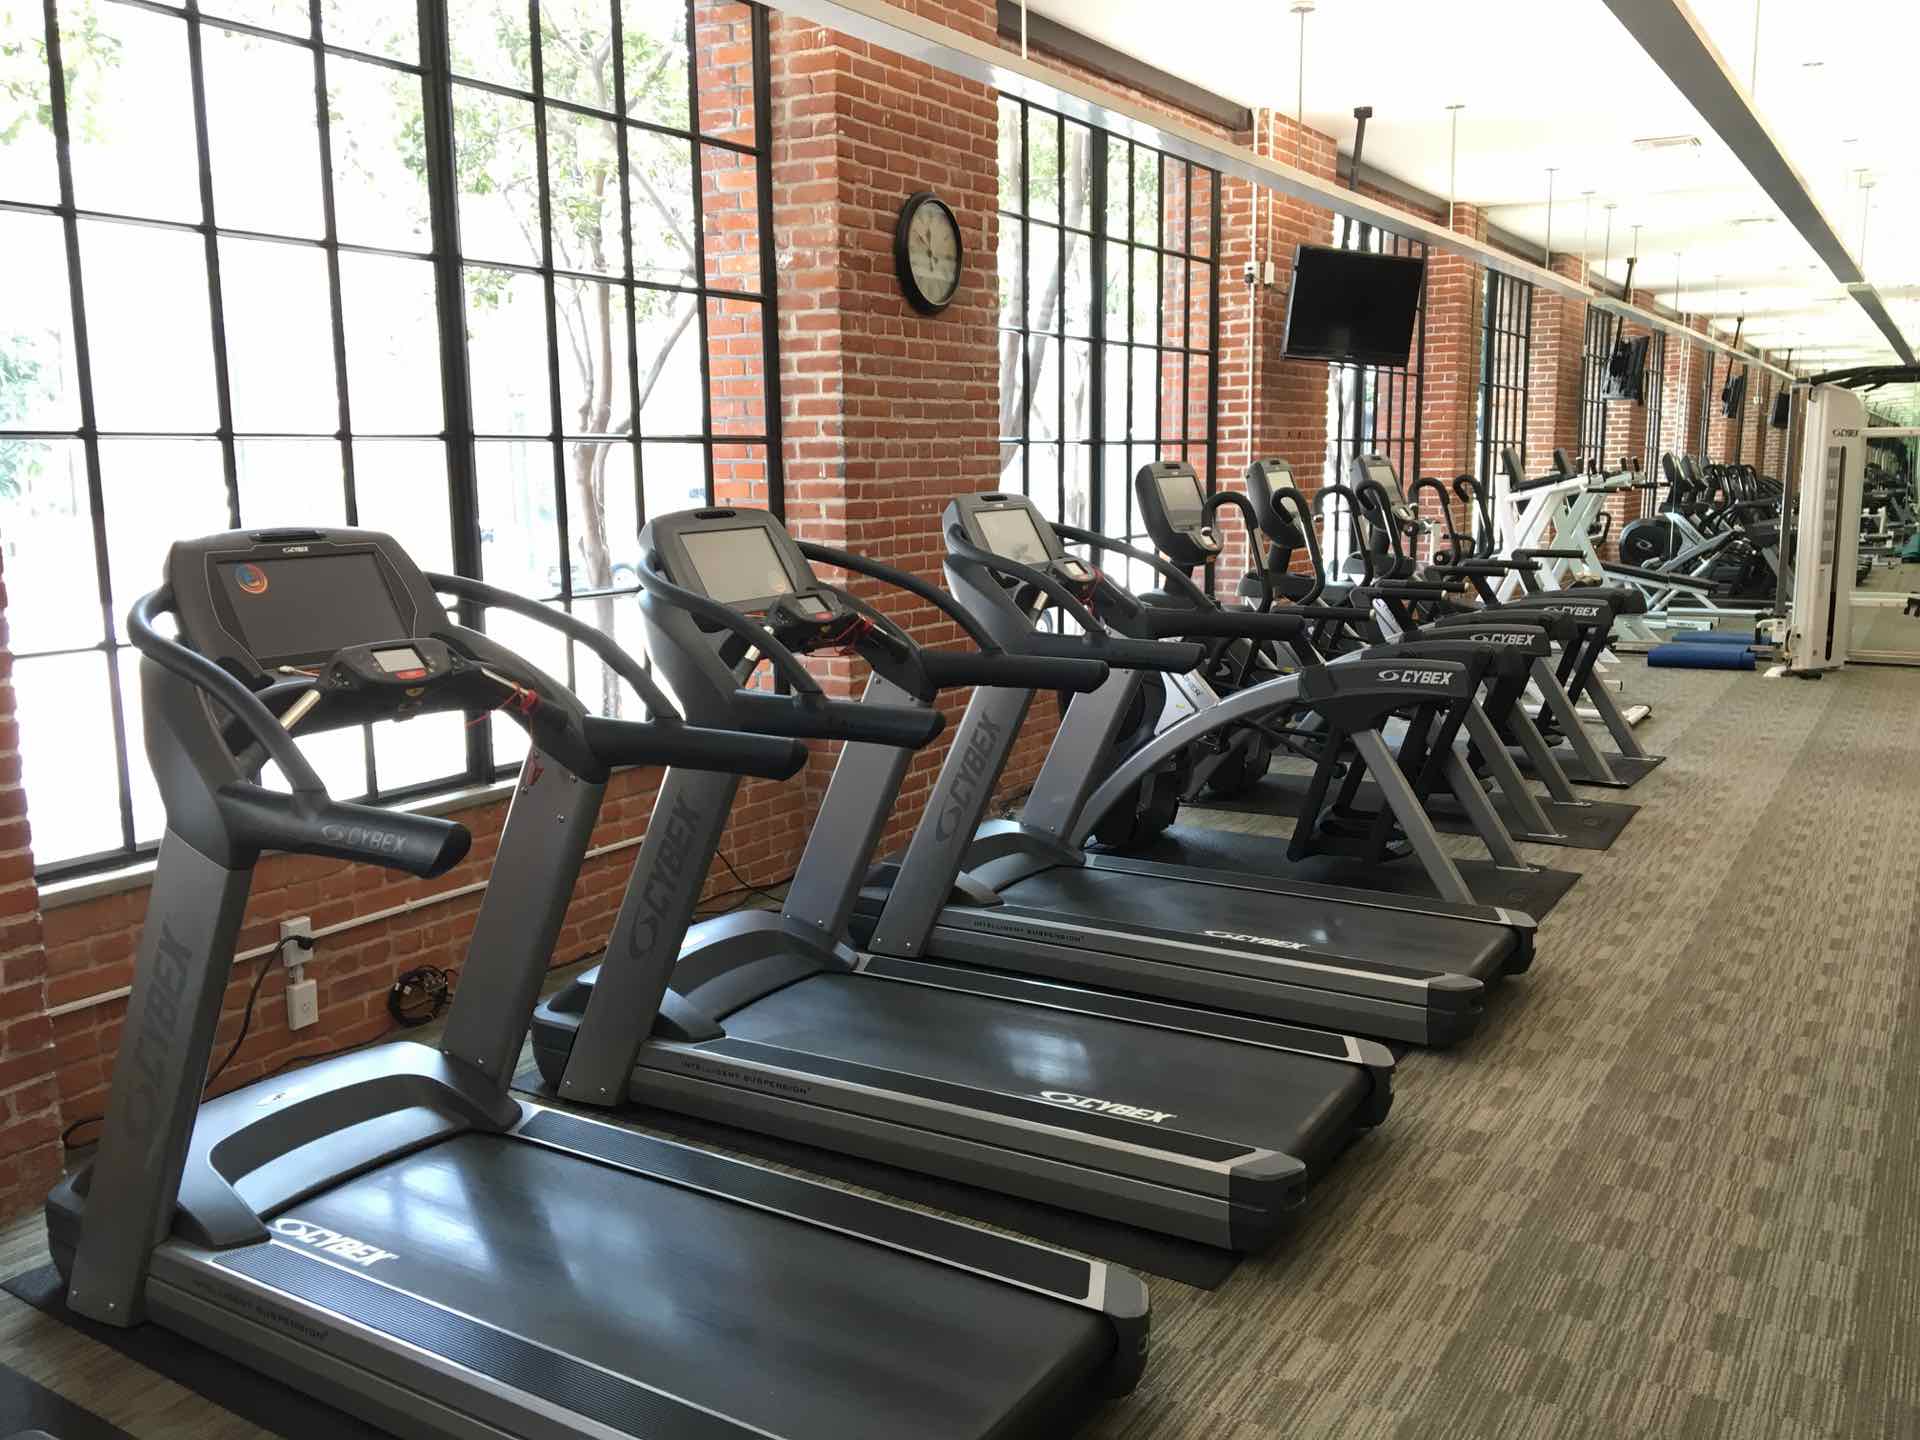 cardio equipment in the gym